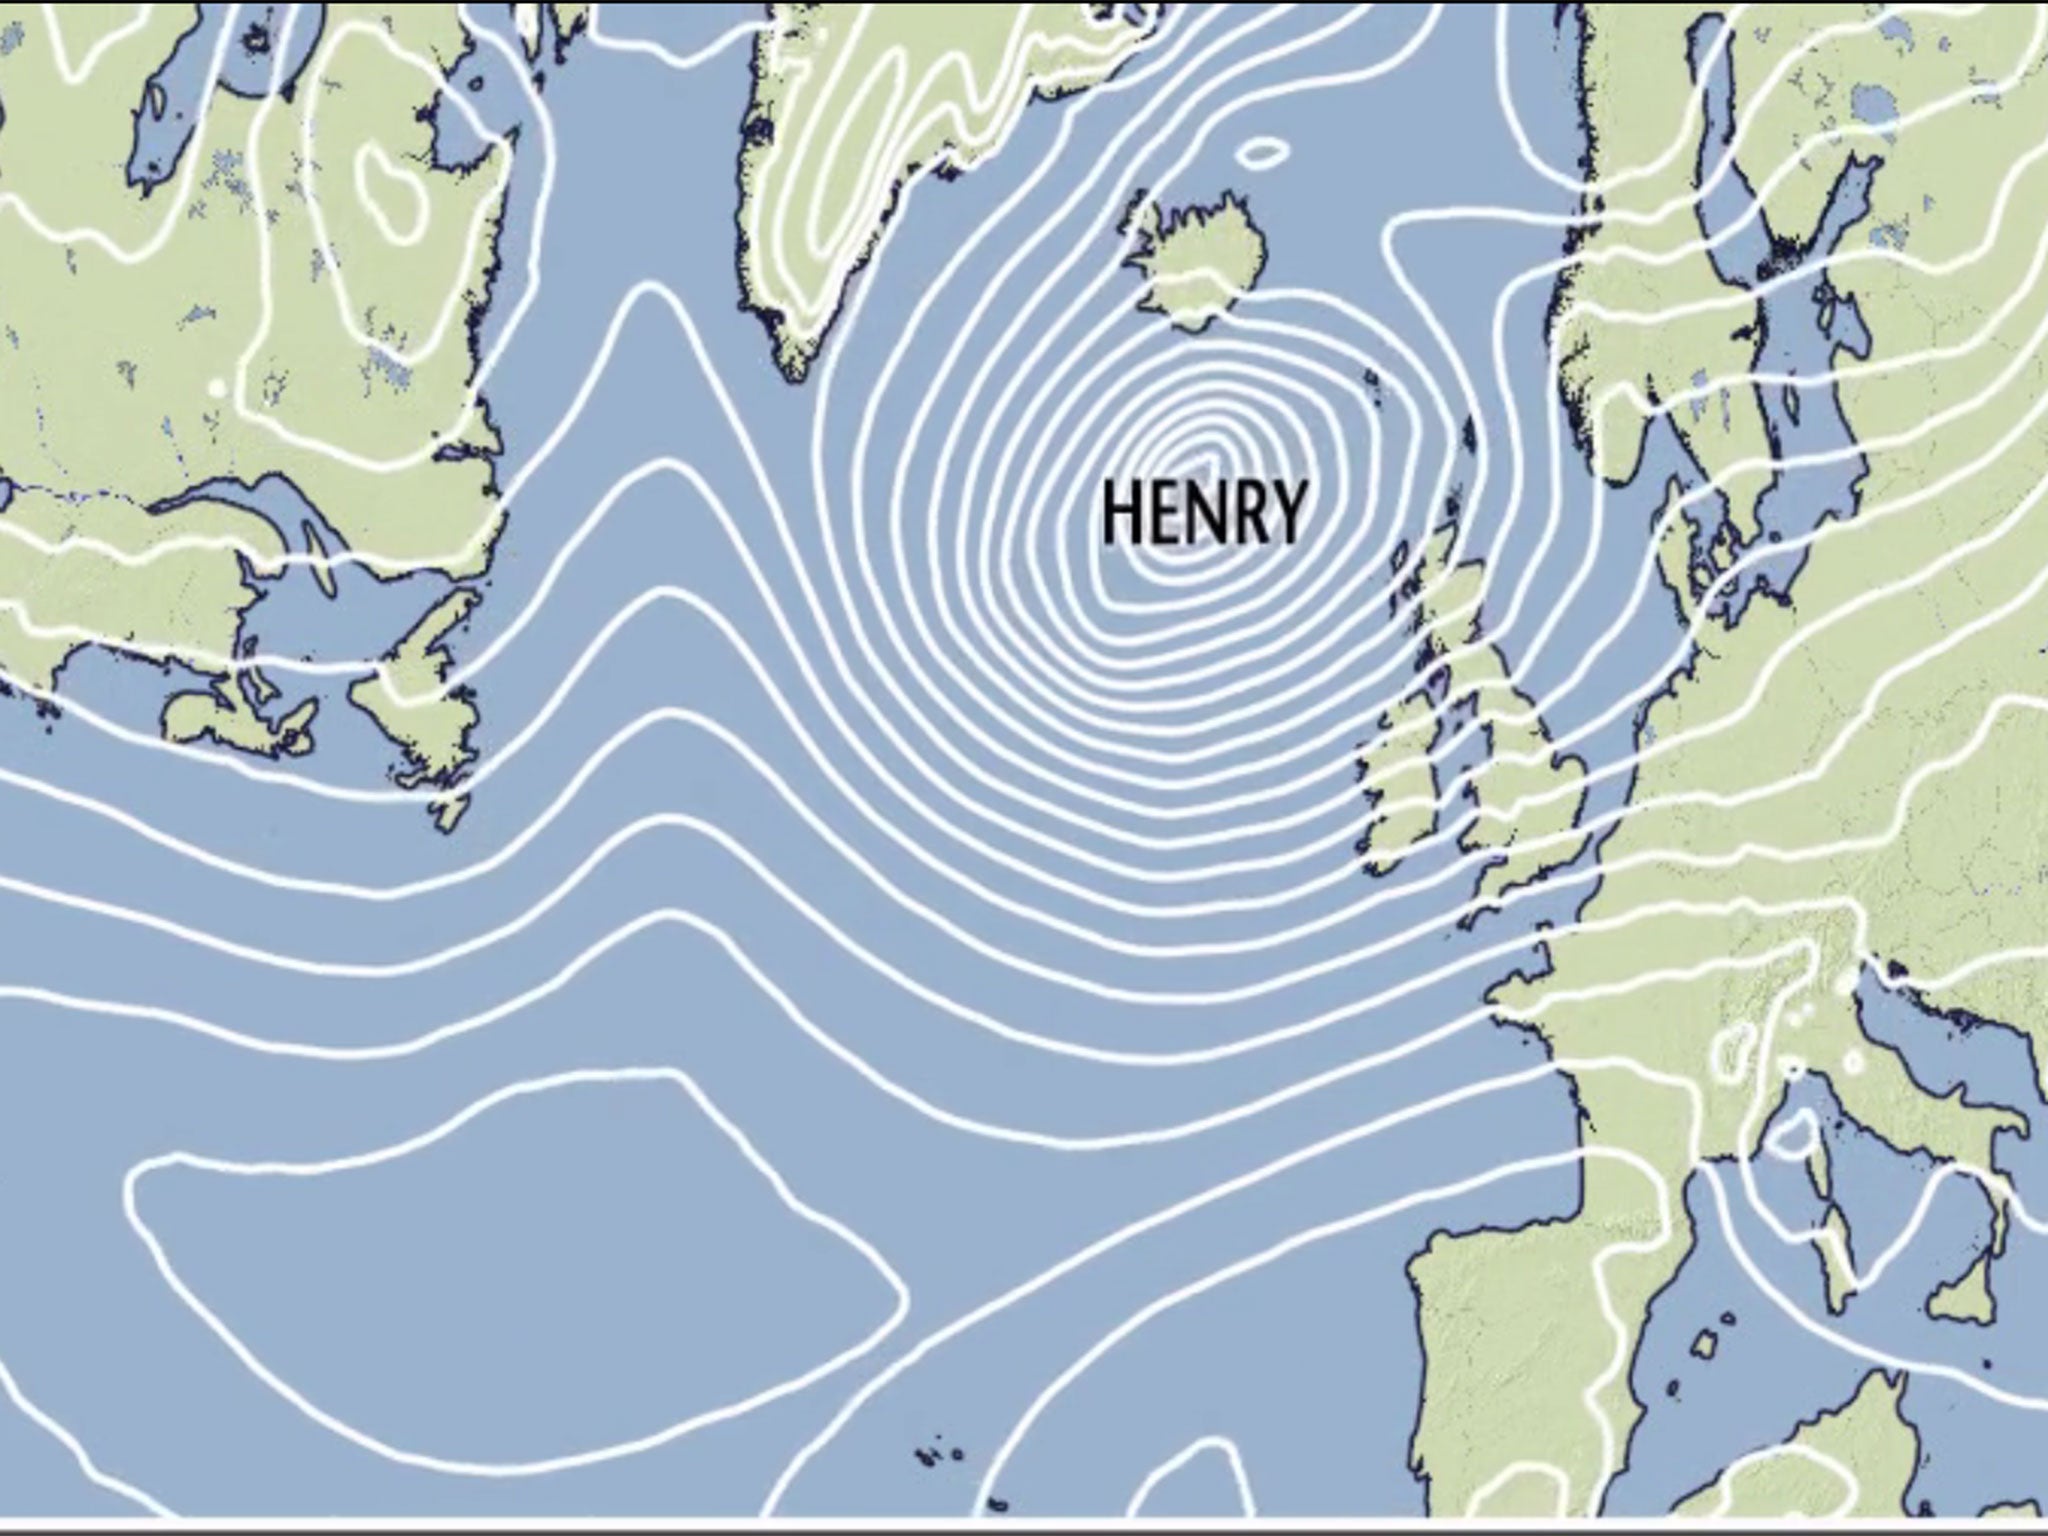 Scotland is expected to bare the brunt of Storm Henry